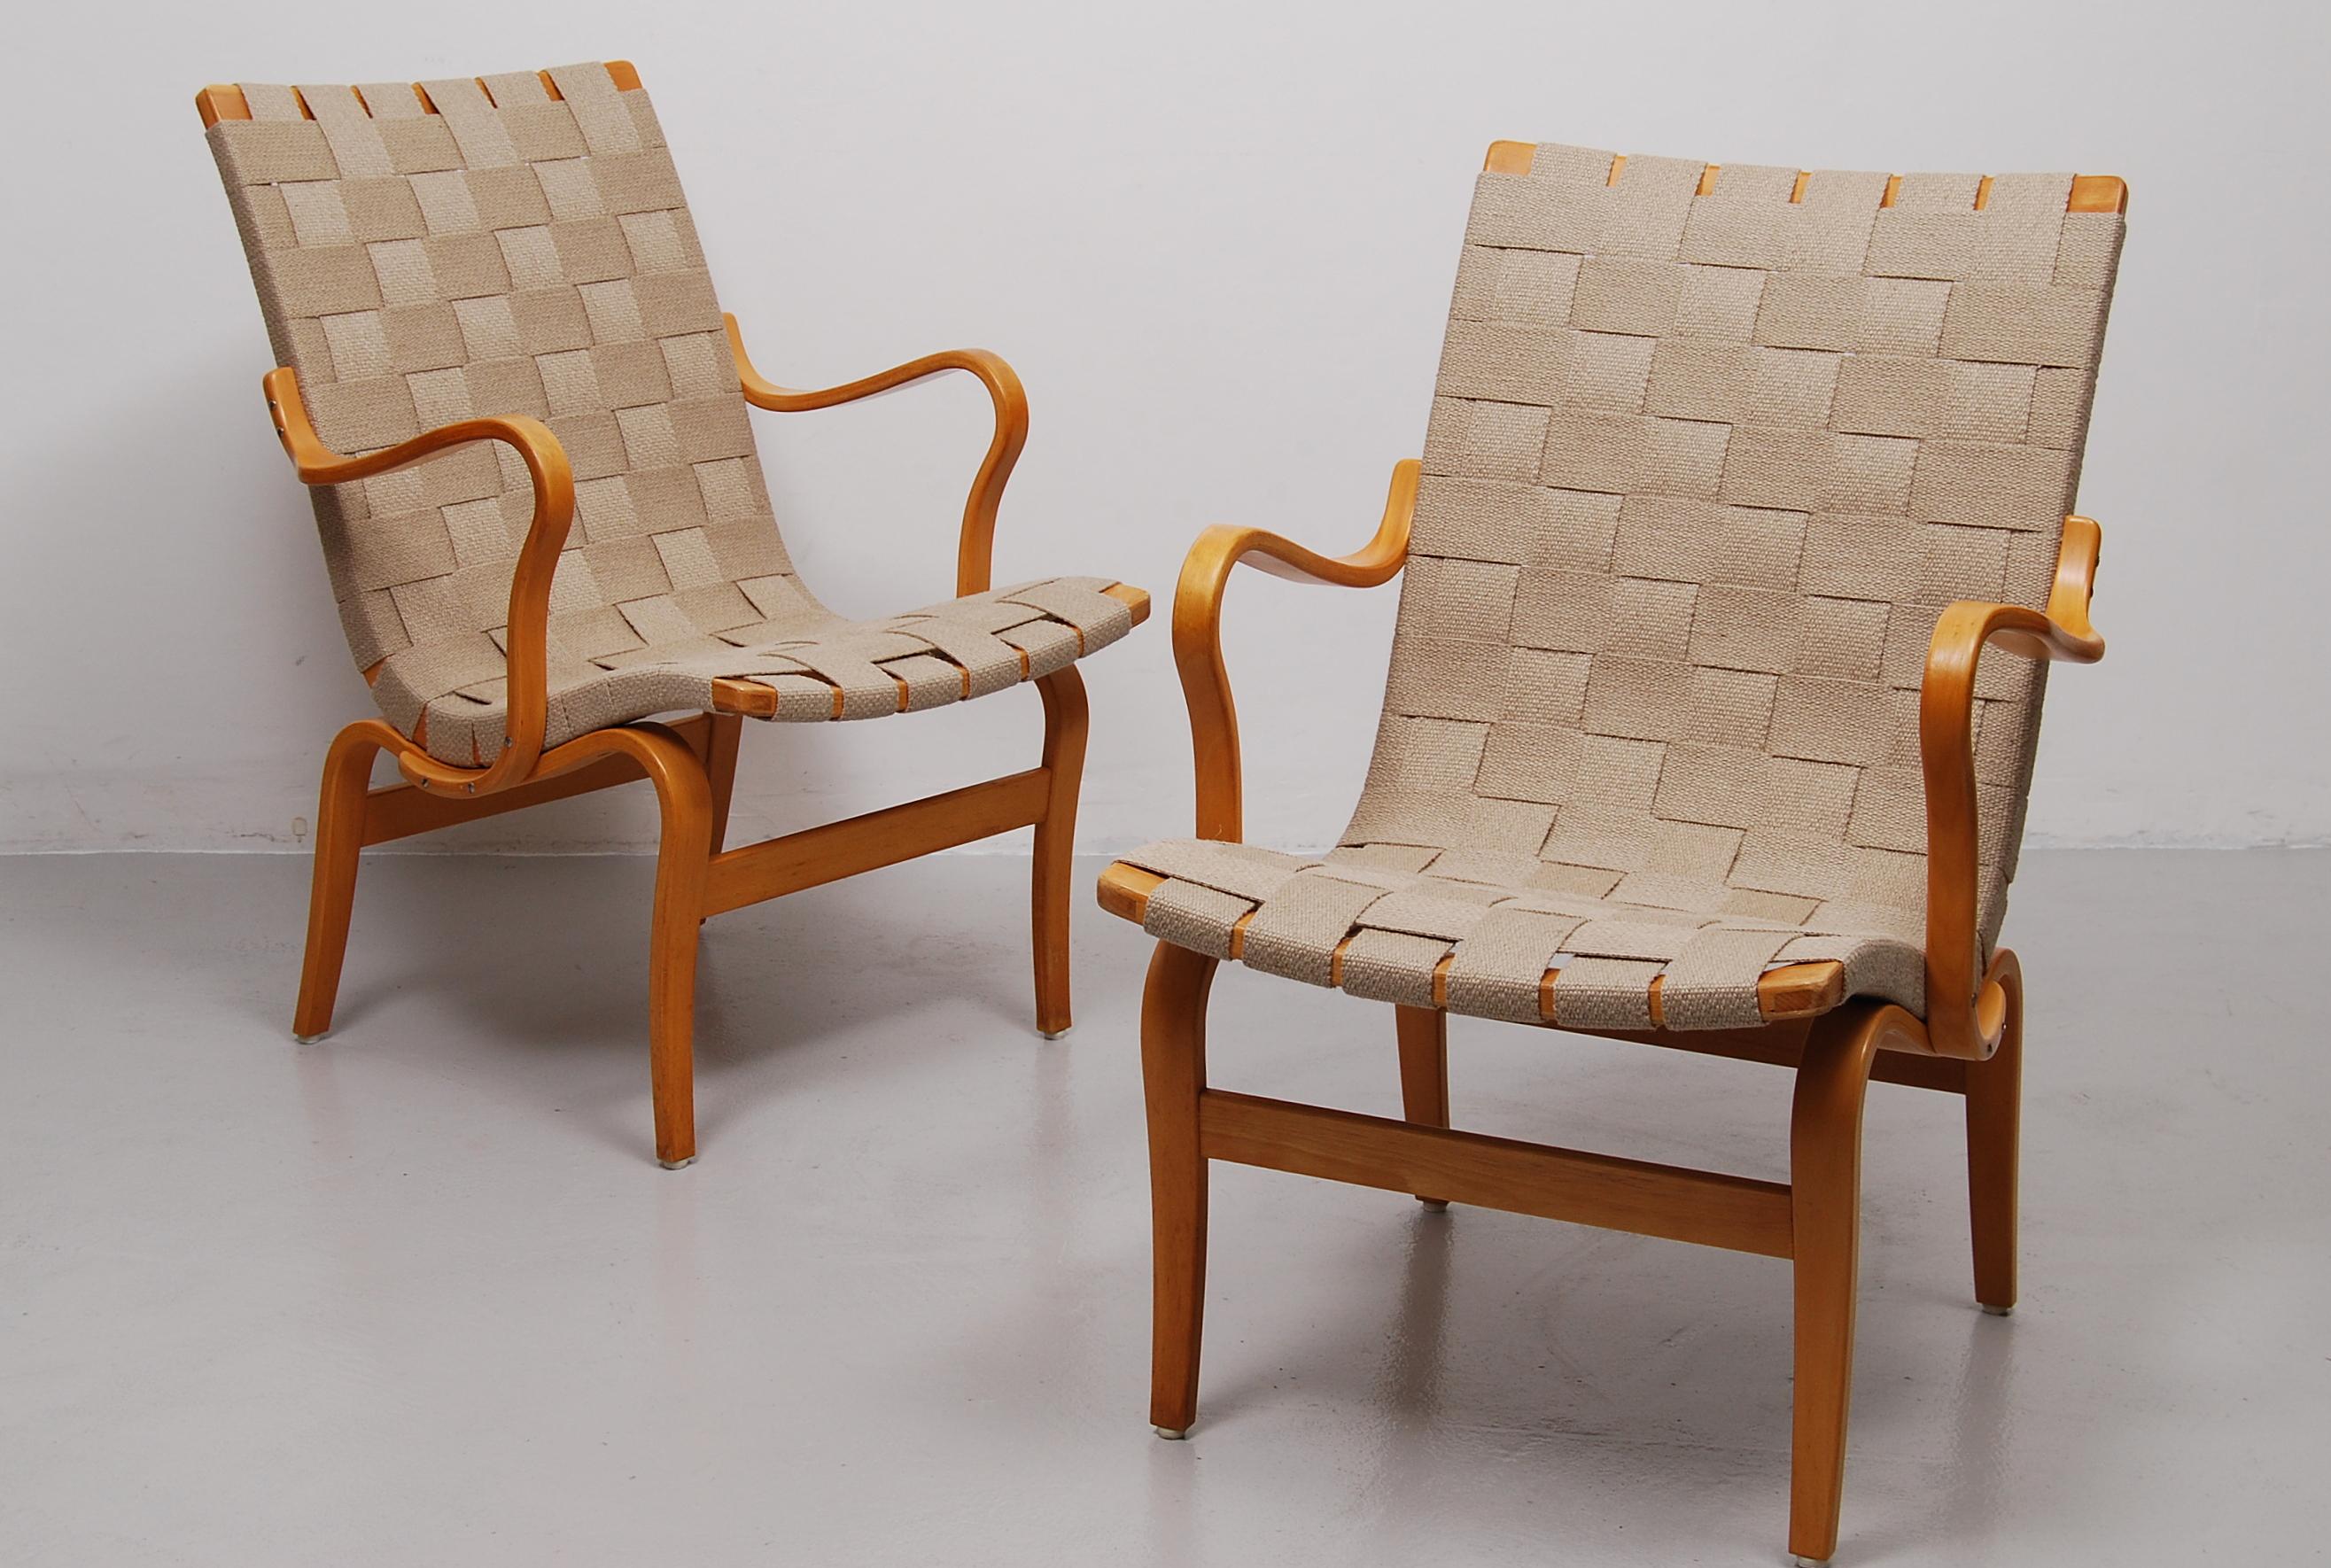 This set of 'Eva' chairs was designed in 1941, Sweden by Bruno Mathsson, Värnamo, Sweden. Produced by DUX, late 1970s-early 1980s. Very good condition. Bent laminated birch wood and brand new natural linen webbing.
 
  